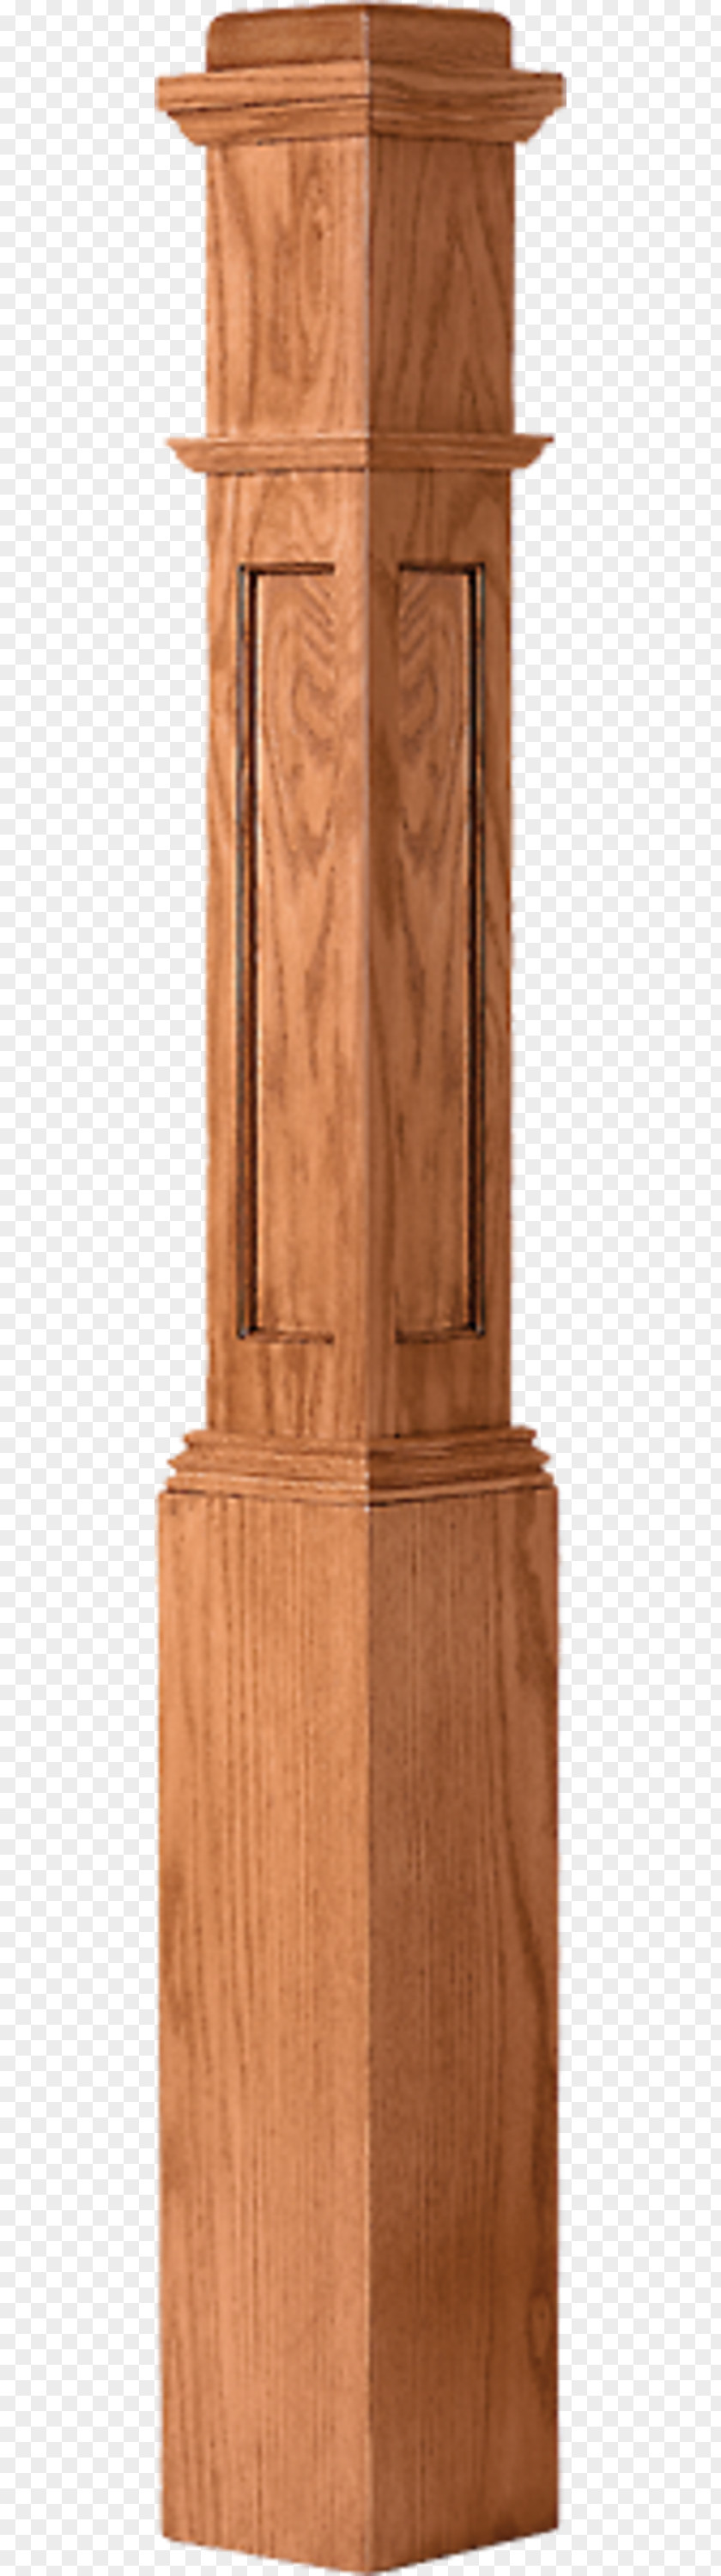 Stairs Newel Baluster Wood Stain Box PNG